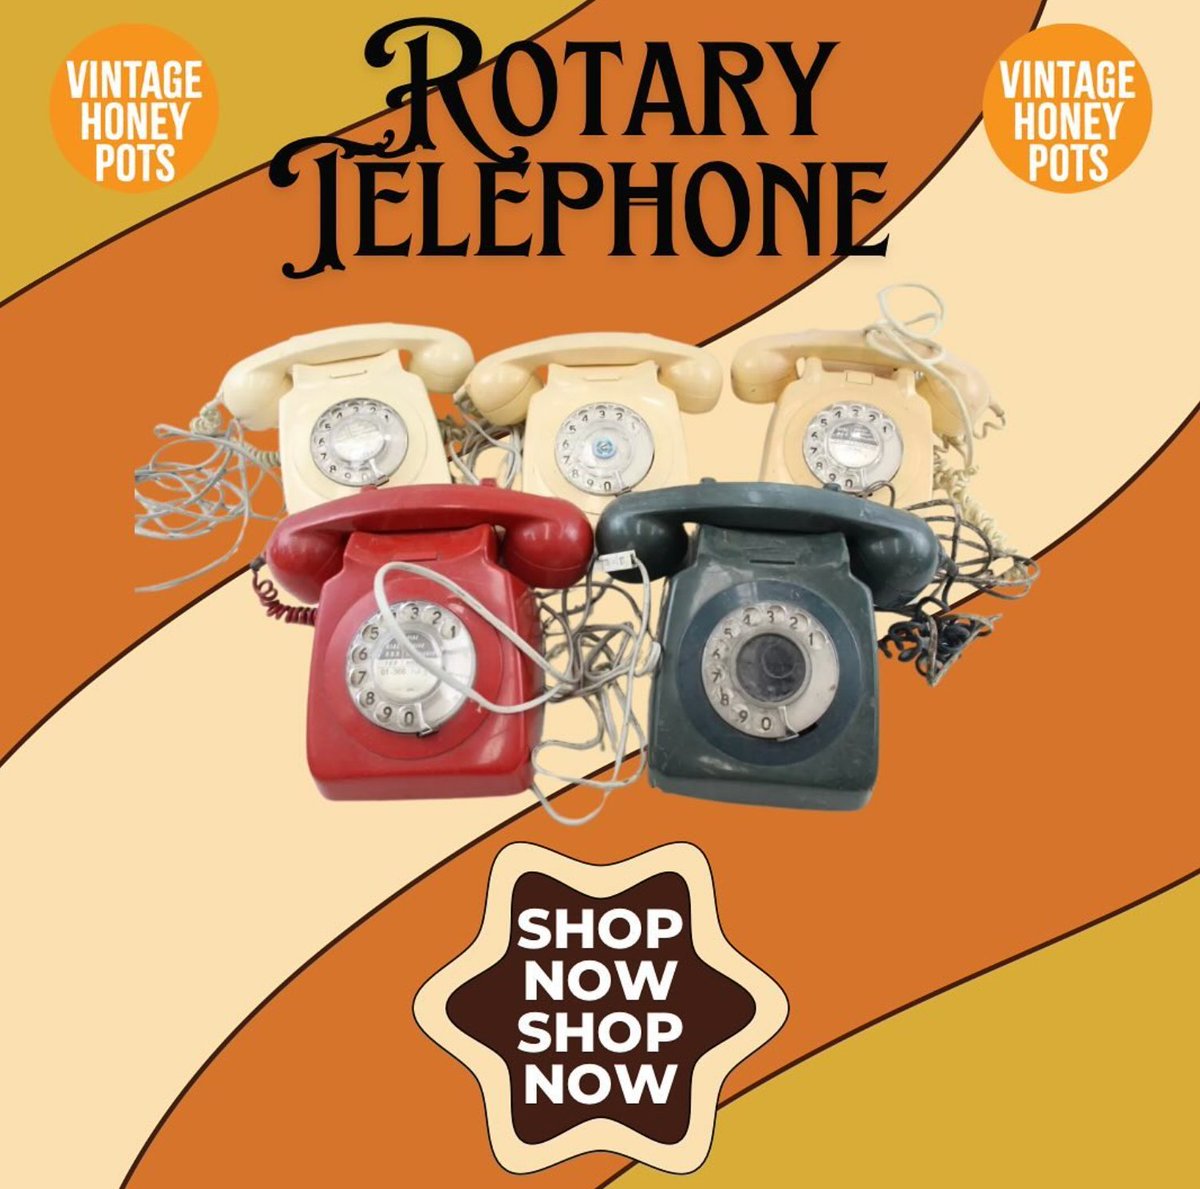 *Ring ring* the 70s called and they want their telephones back!☎️

Check out these awesome vintage rotary telephones!

#vintage #shopVintage #rotaryphones☎️ #shopnow